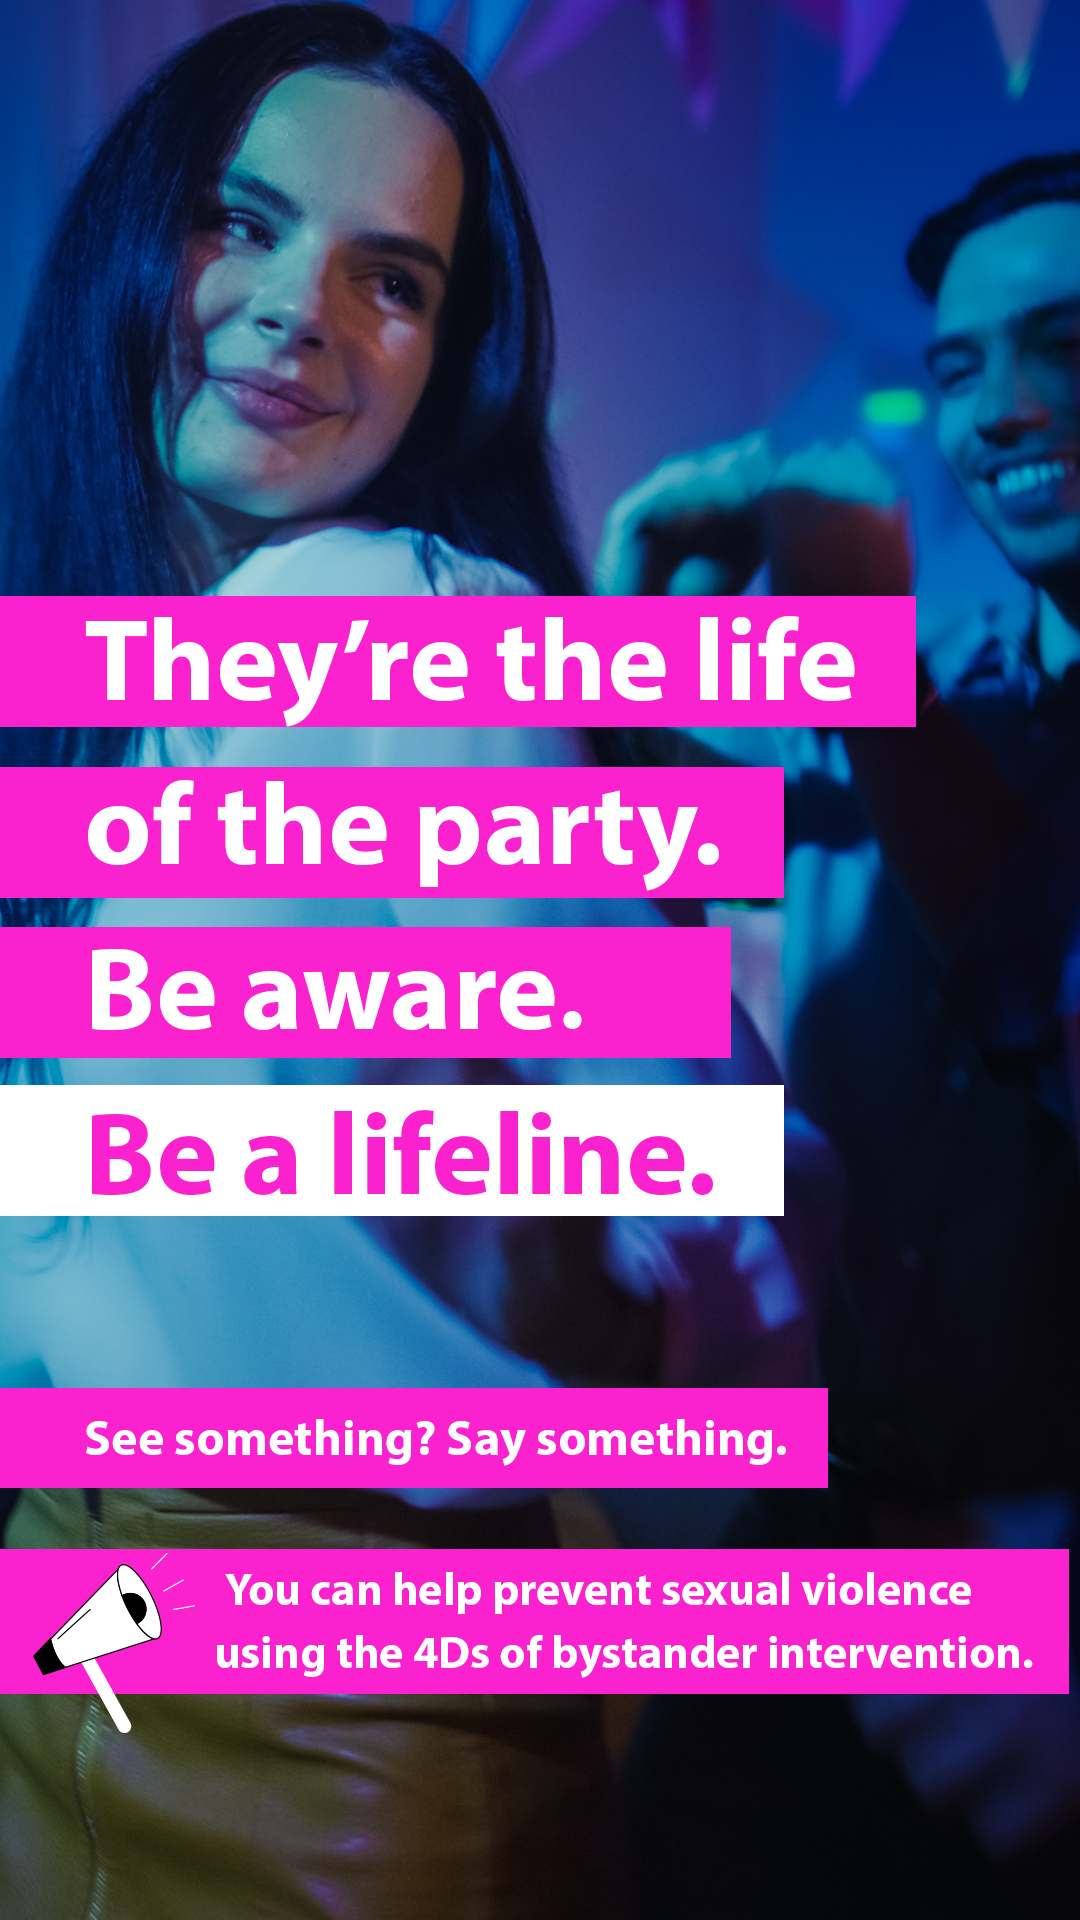 two people dance together at a party with text that says 'They're the life of the party. Be aware. Be a lifeline. See something? Say something. You can help prevent sexual violence using the 4Ds of bystander intervention.'